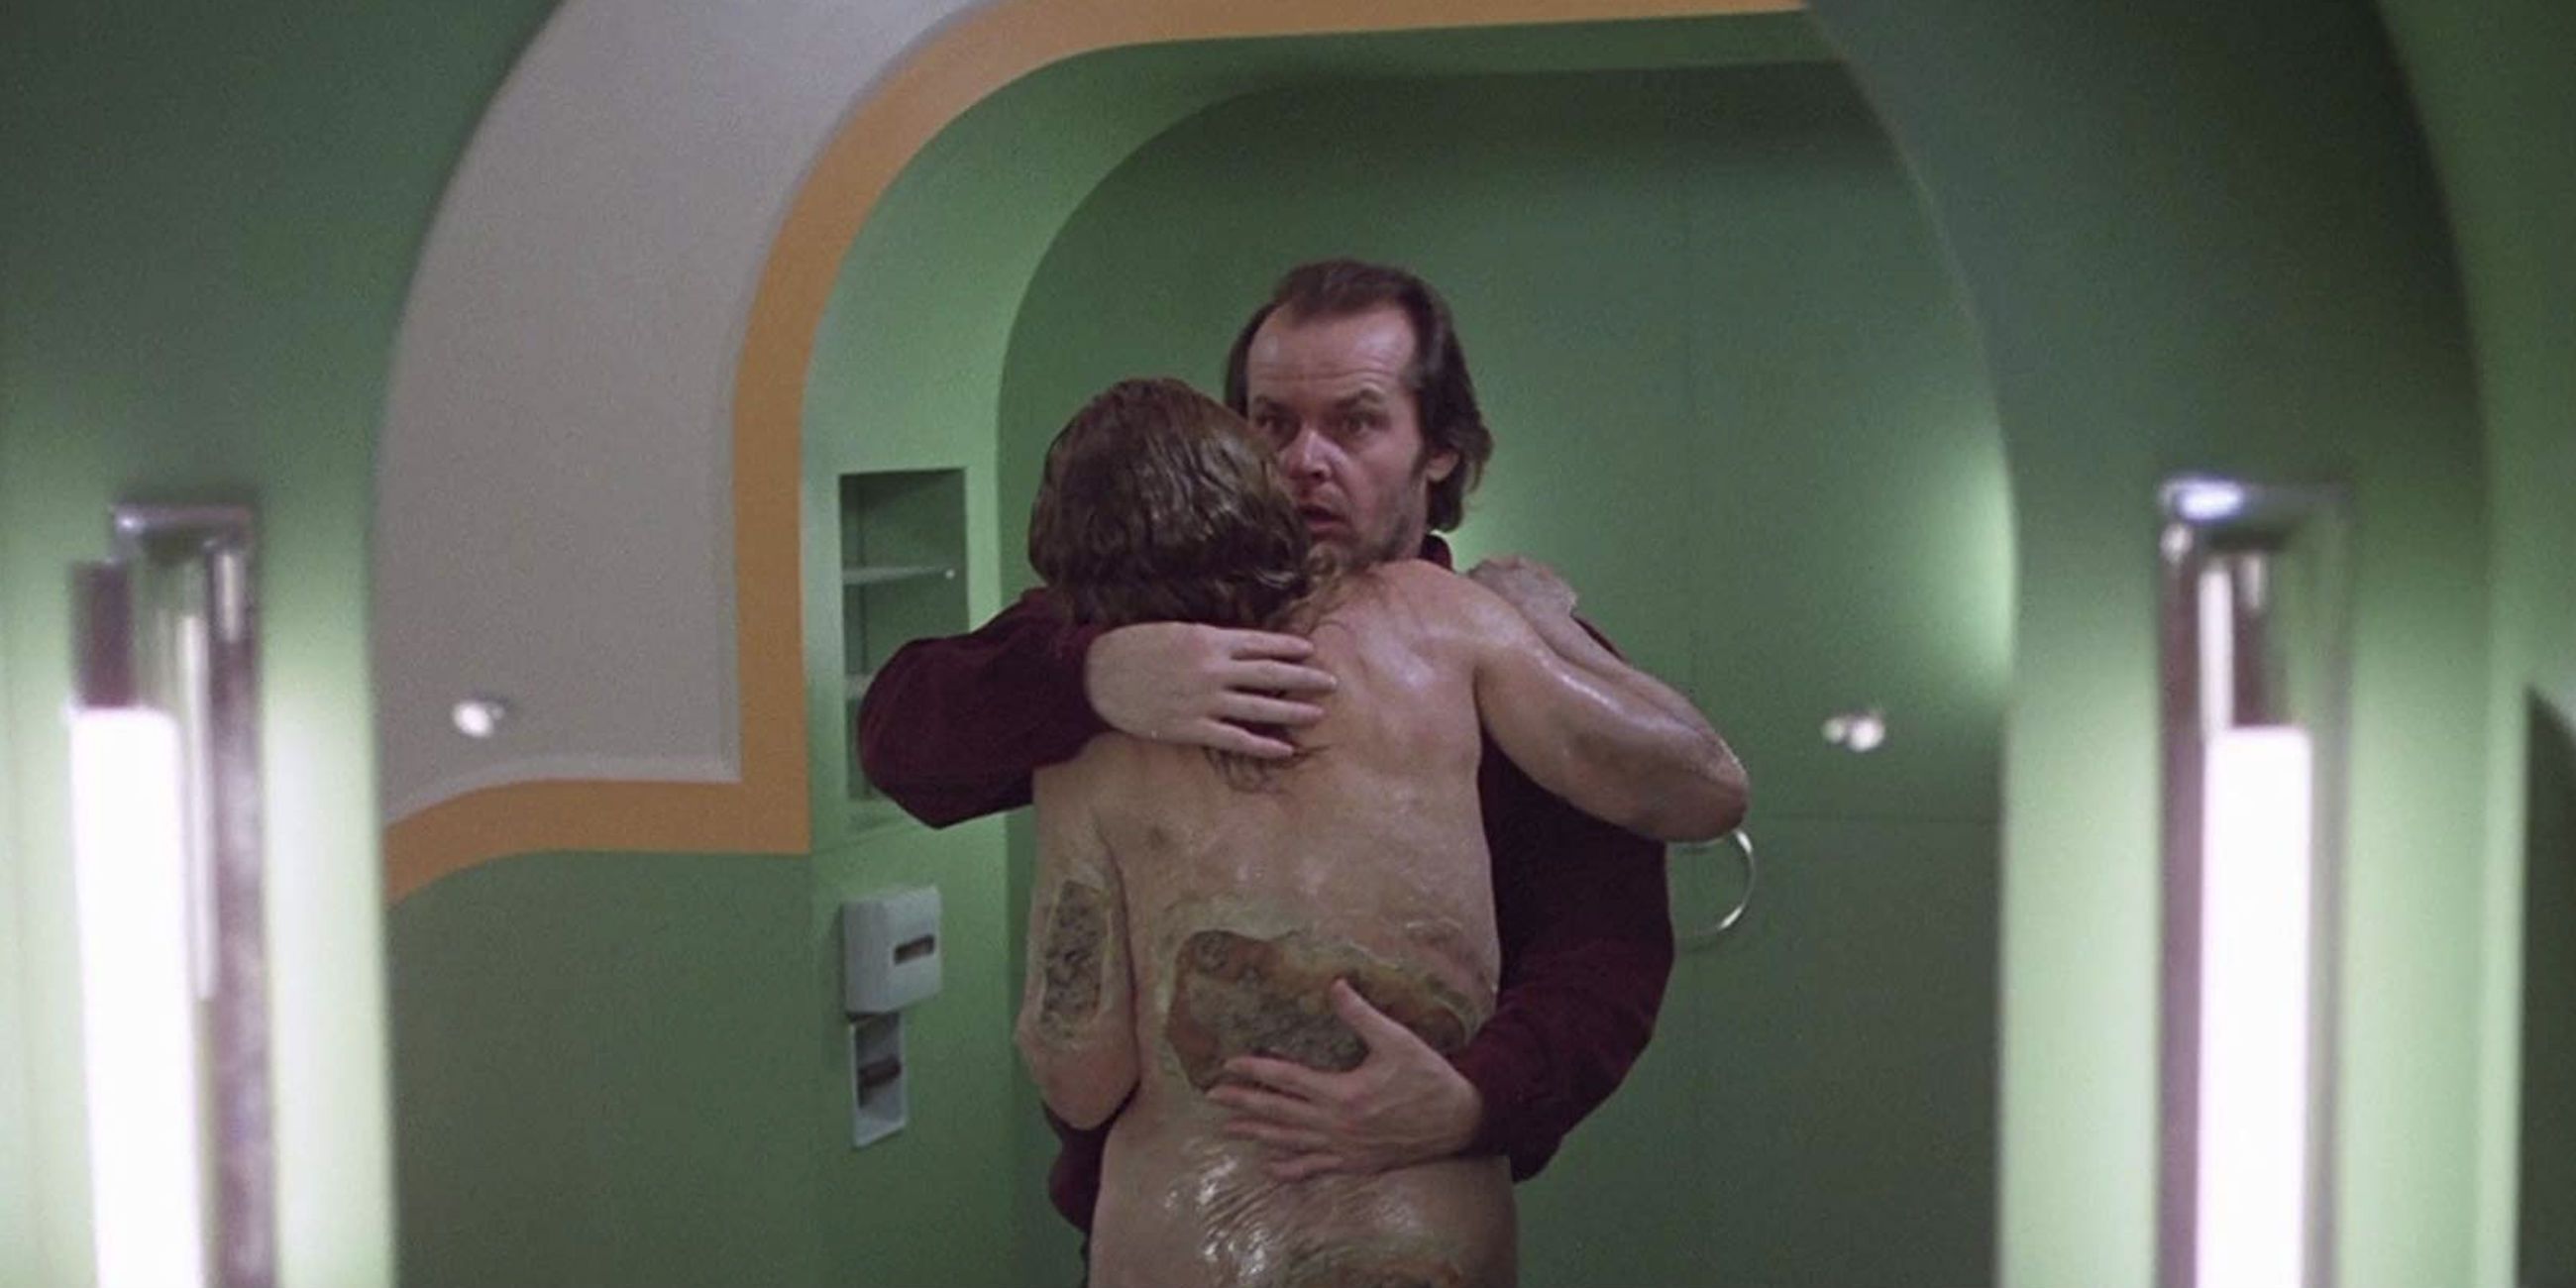 Jack Nicholson kissing the woman from the bathtub in The Shining